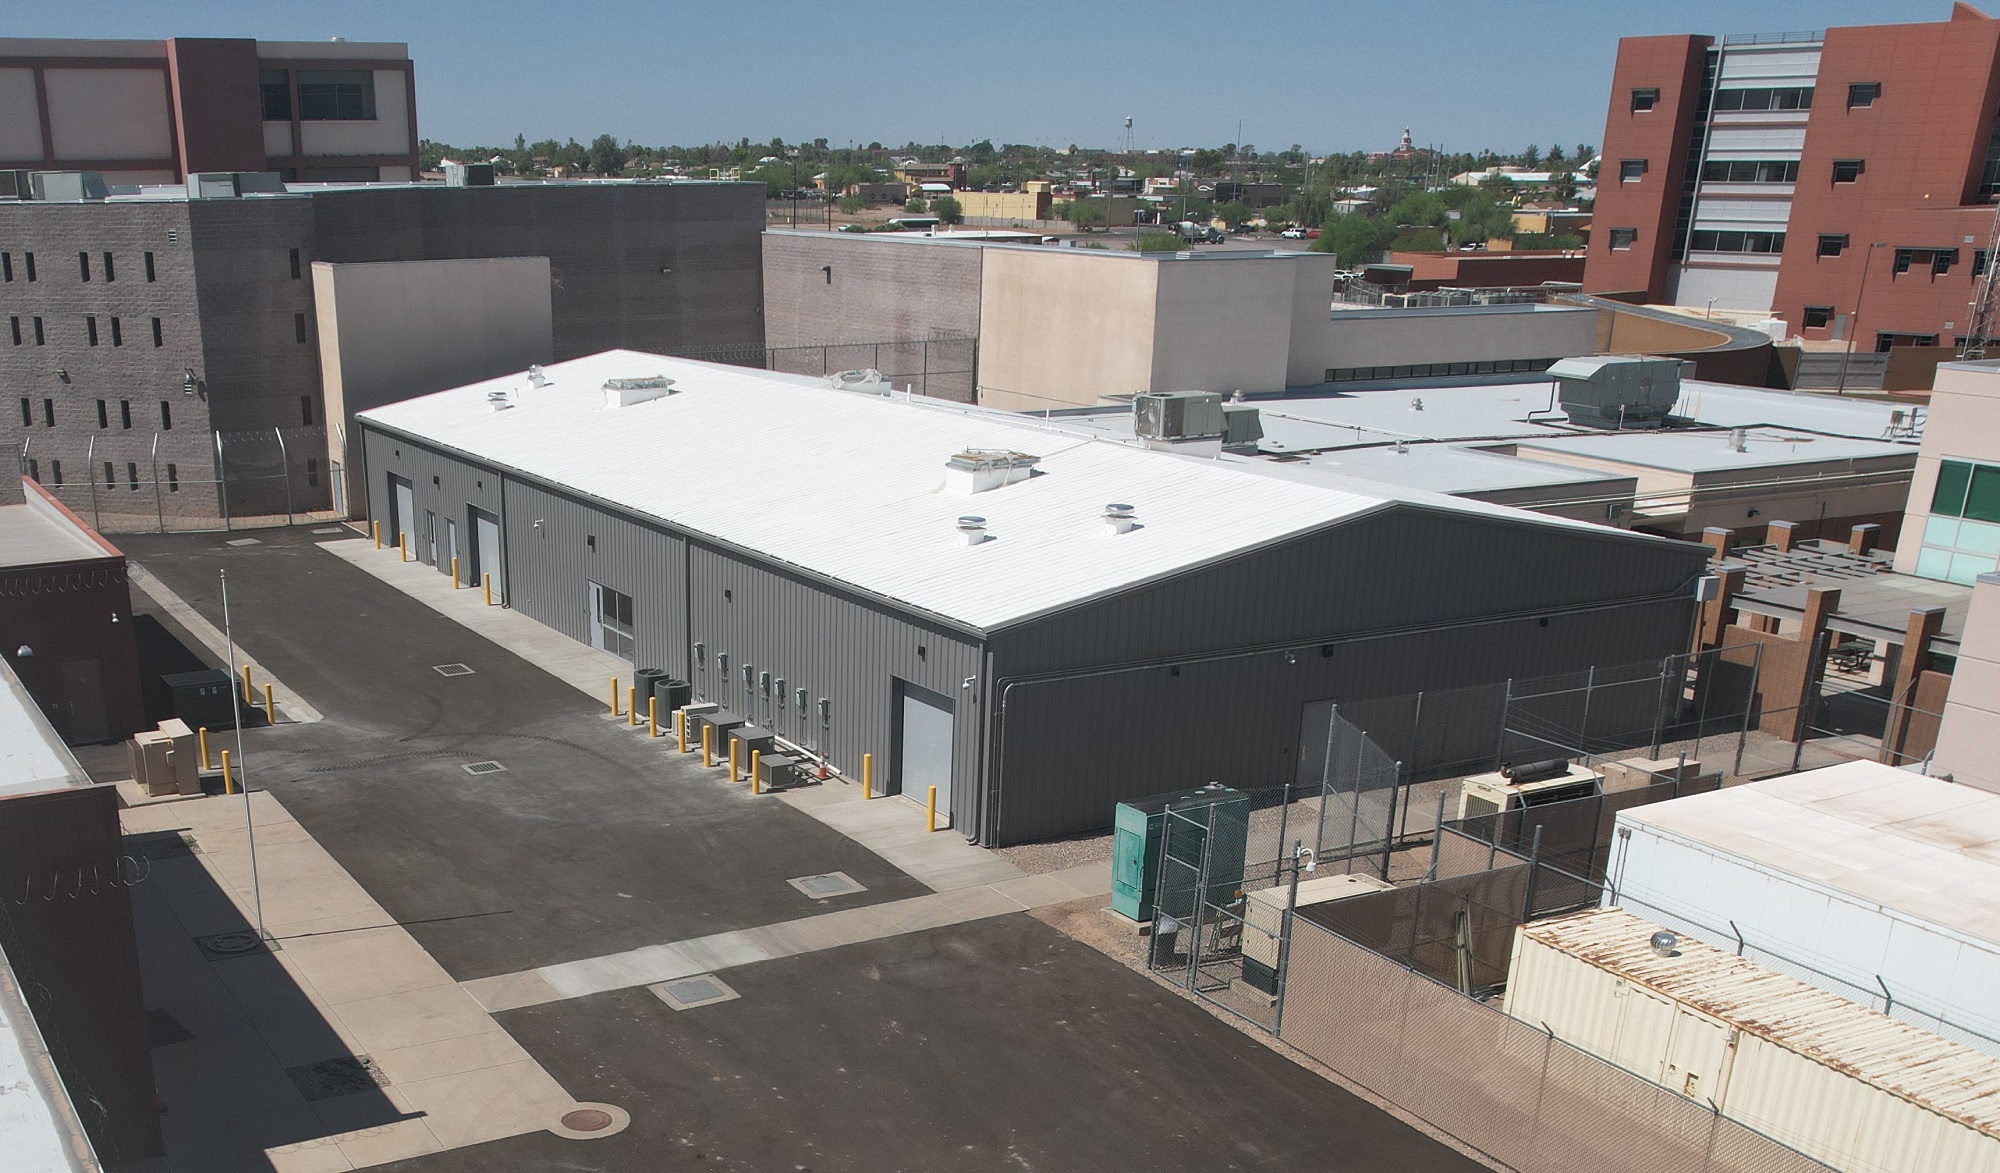 Pinal County Sheriff’s Evidence Storage & Warehouse Facility